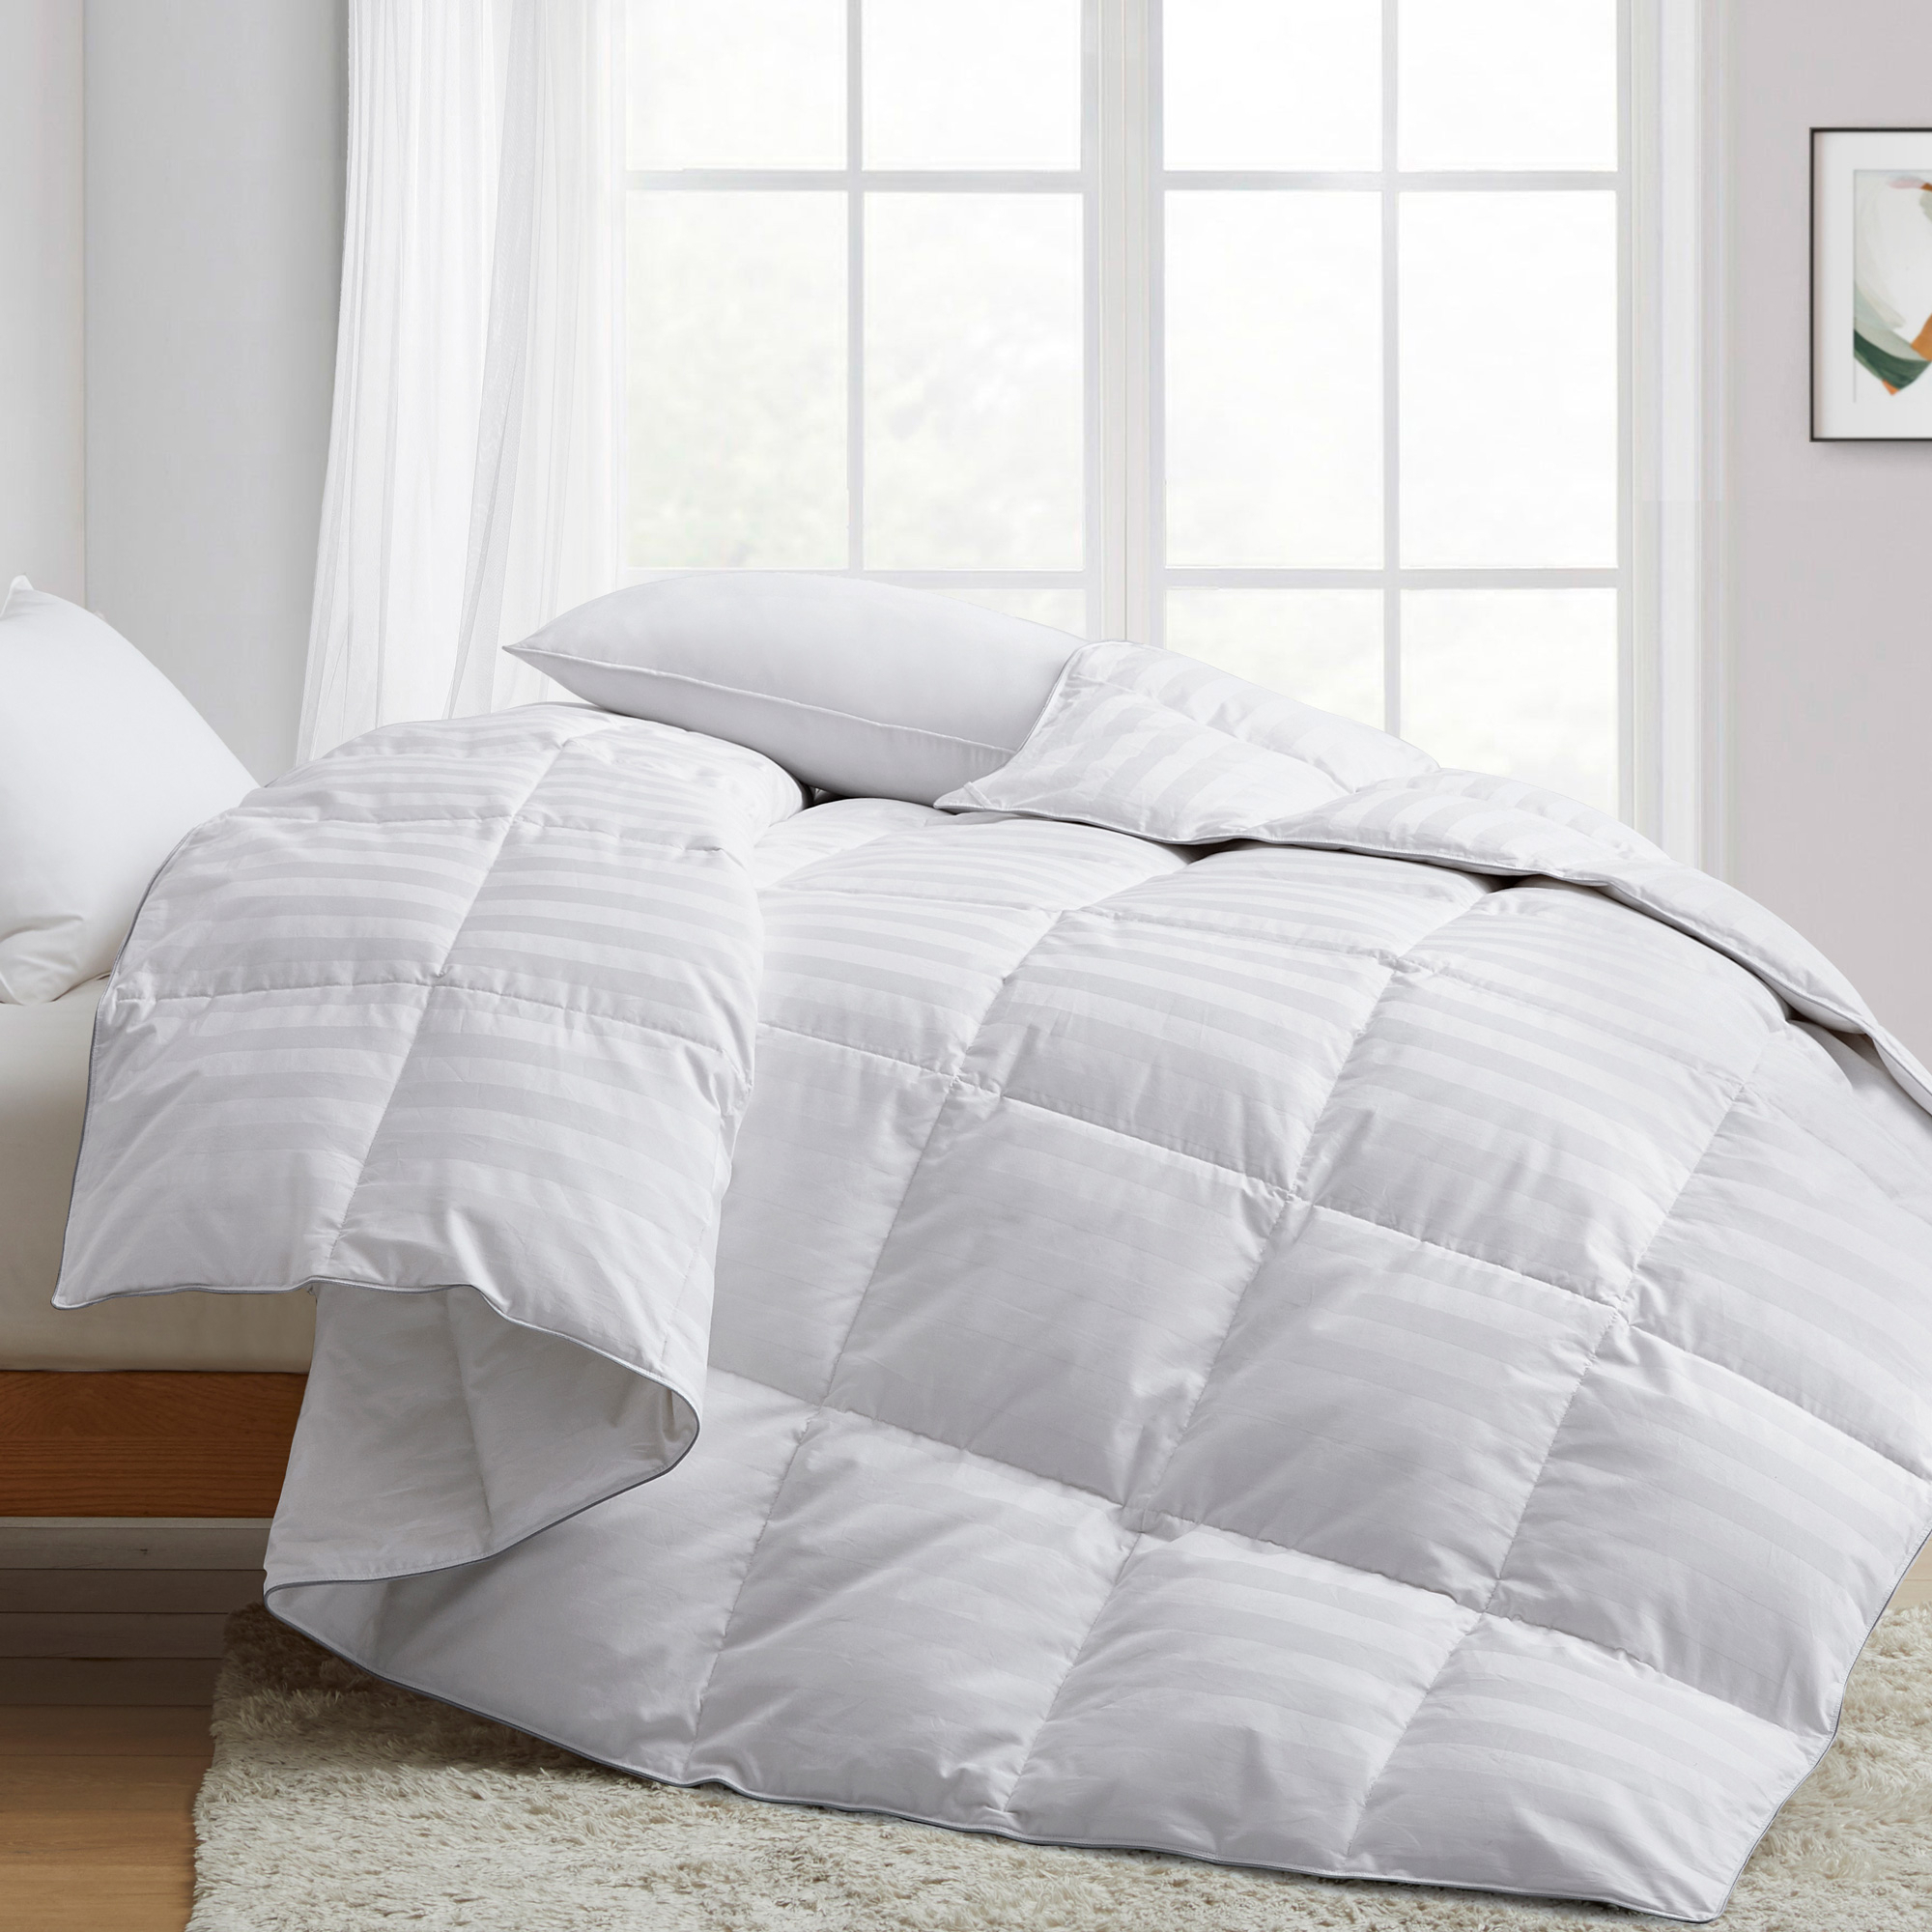 All Seasons Feather Fiber And Down Comforter Cotton Cover 500 TC - Twin, White